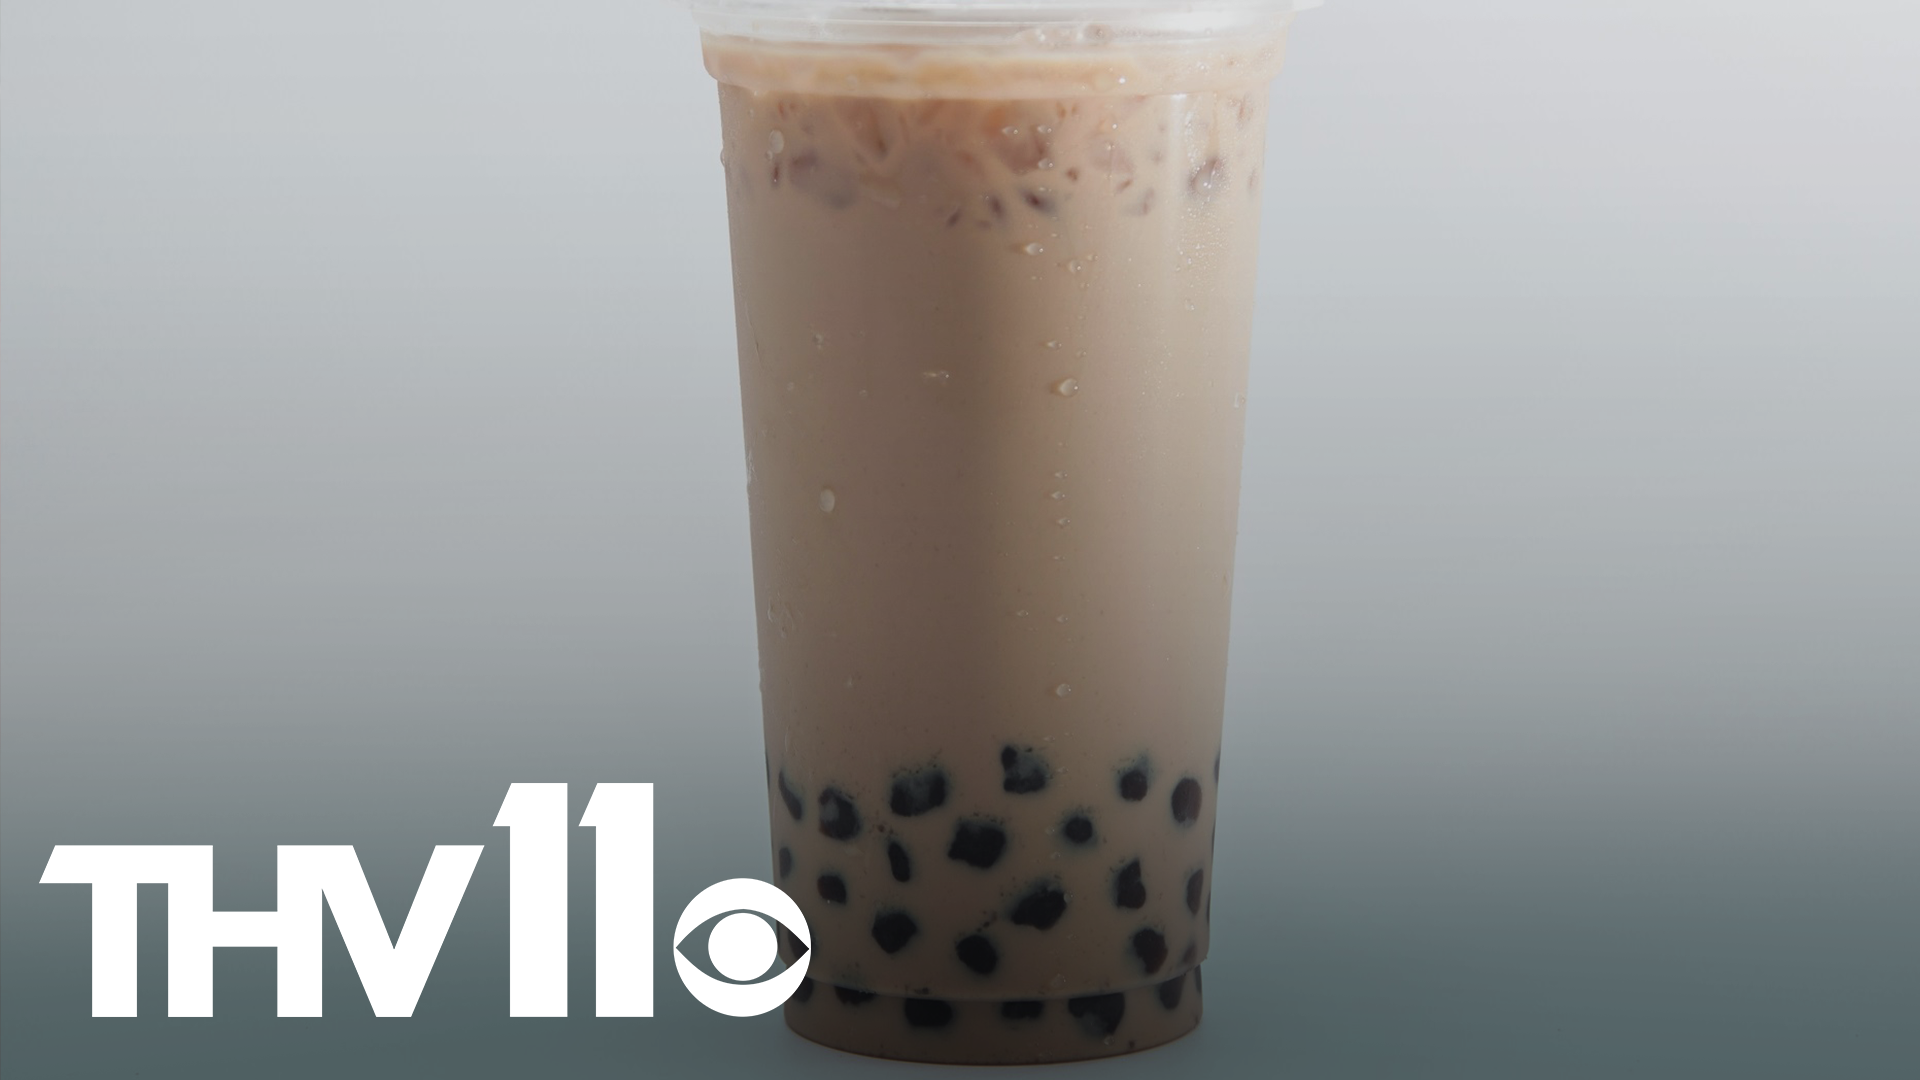 Boba originated in Taiwan in the '80s and then was popularized in China, Hong Kong, and now in the United States (including Arkansas).